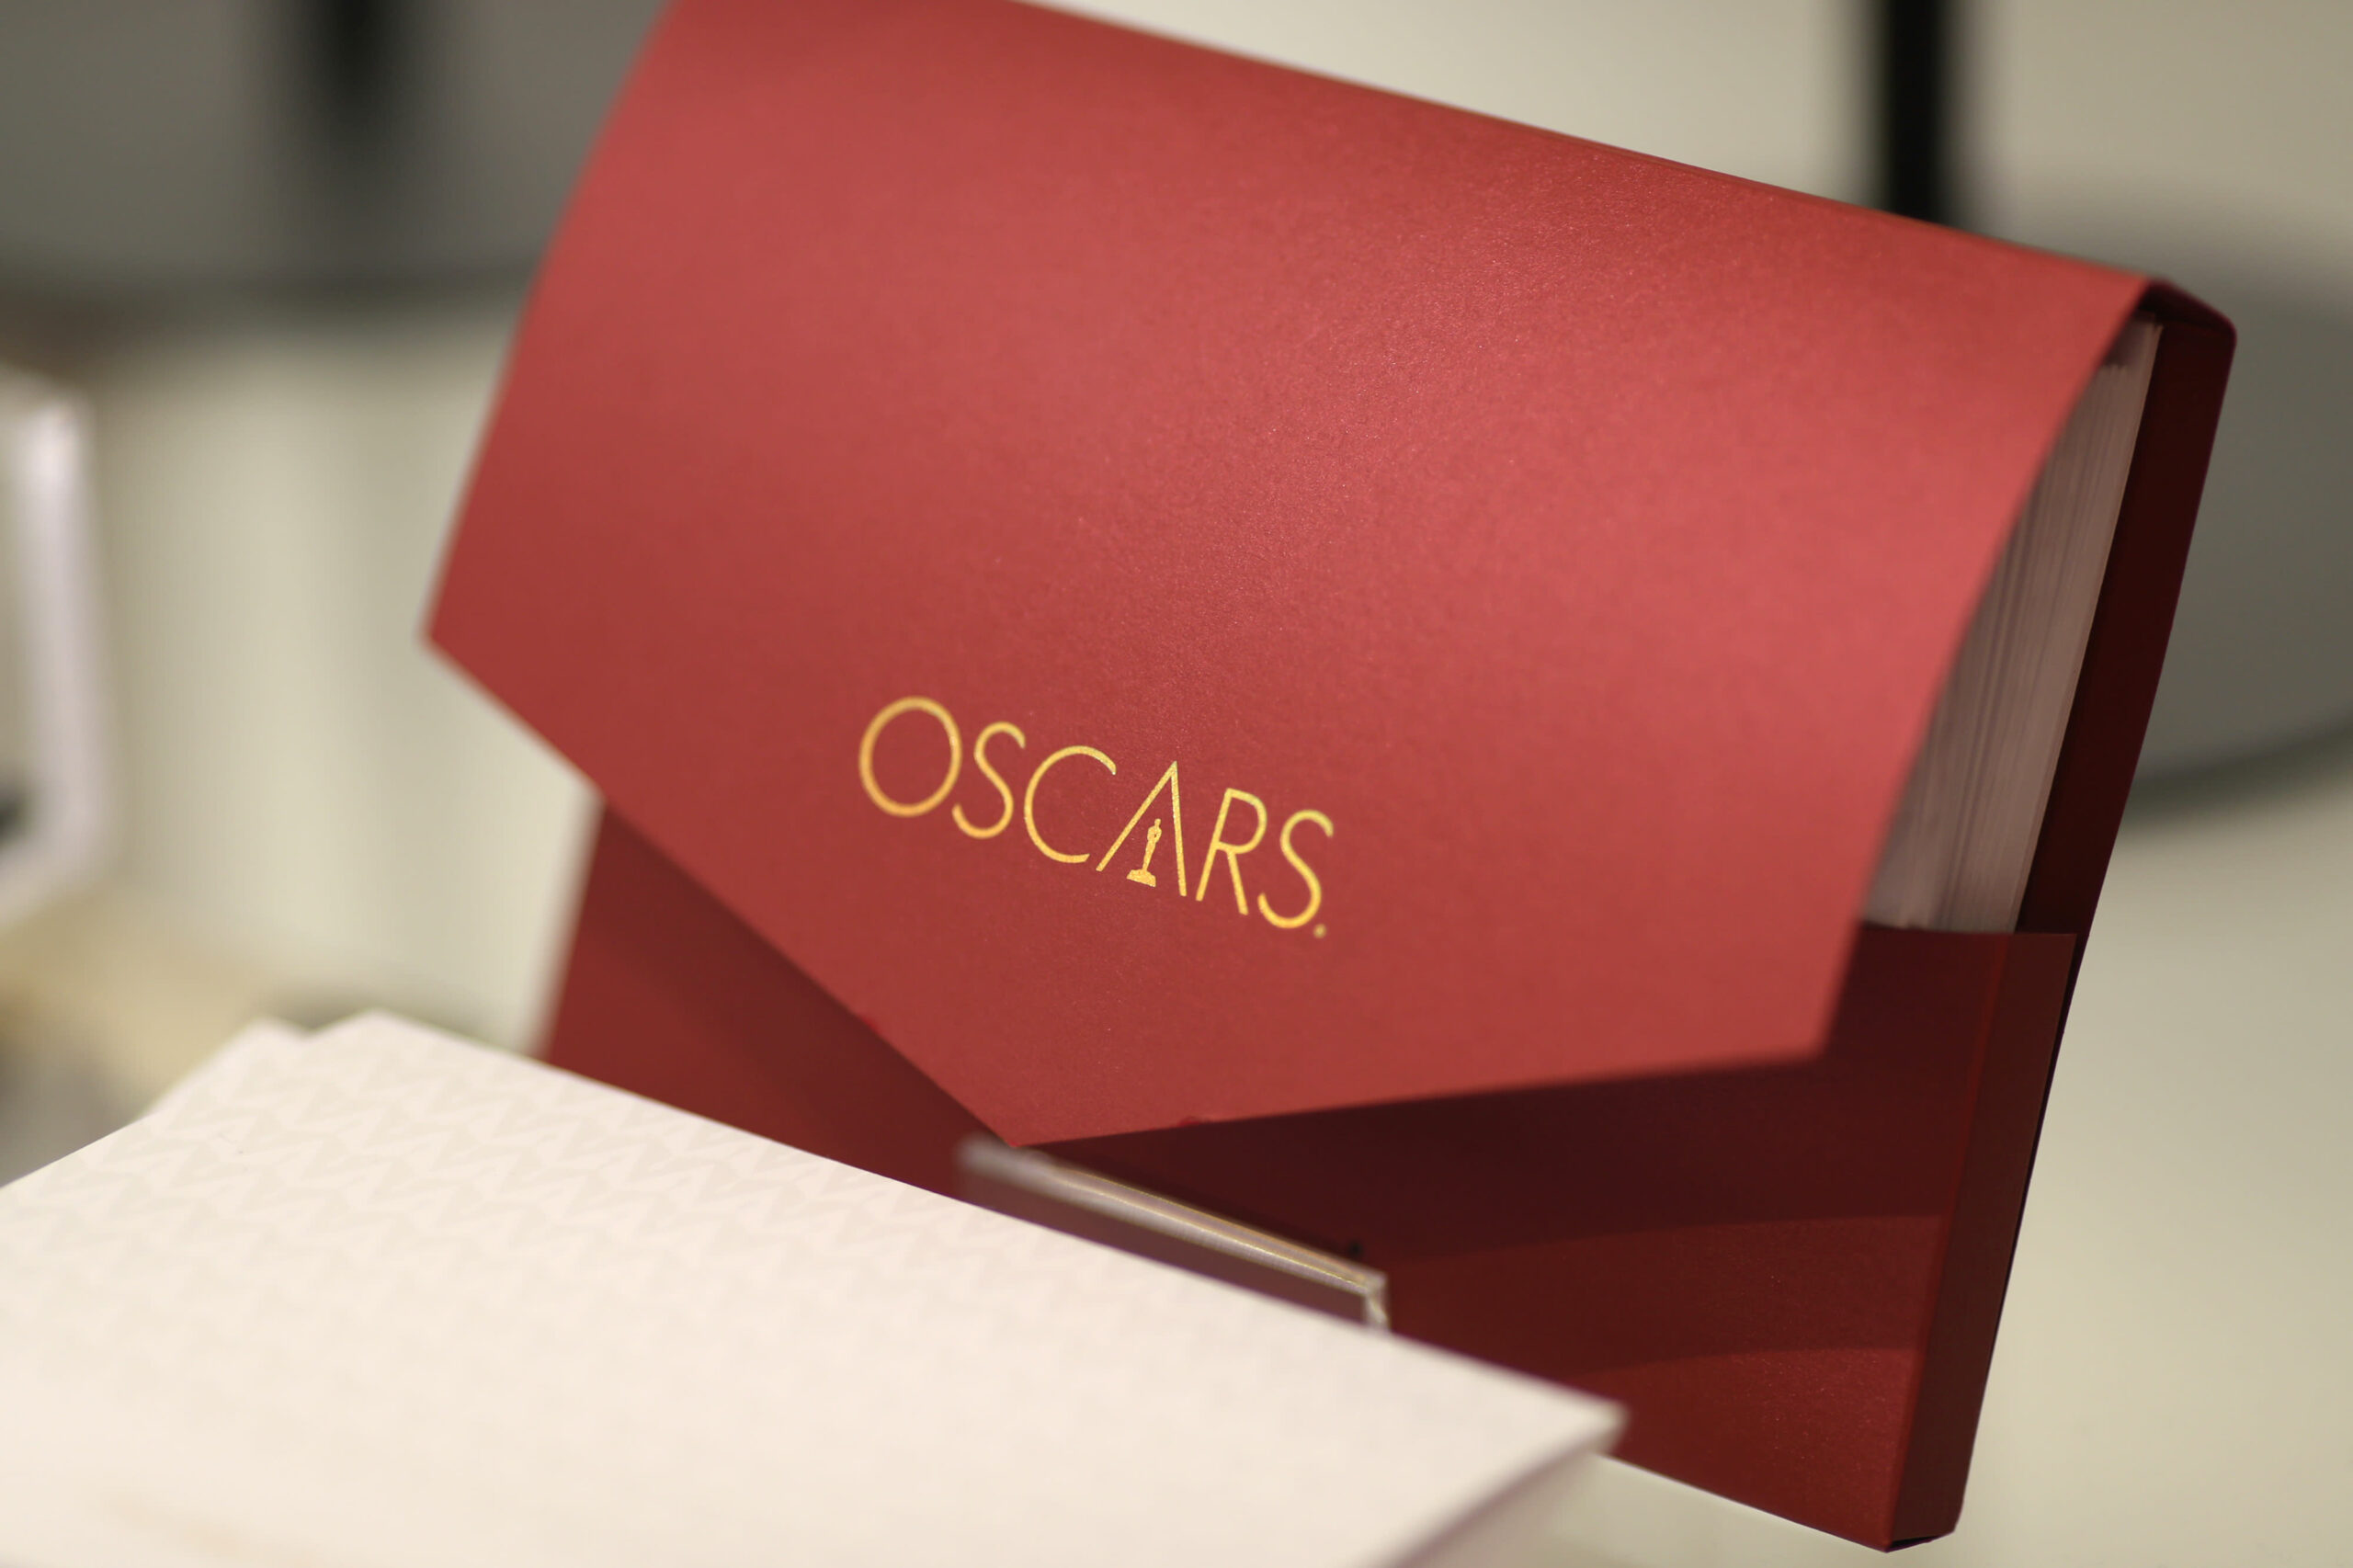 The whole checklist of Academy Awards nominees